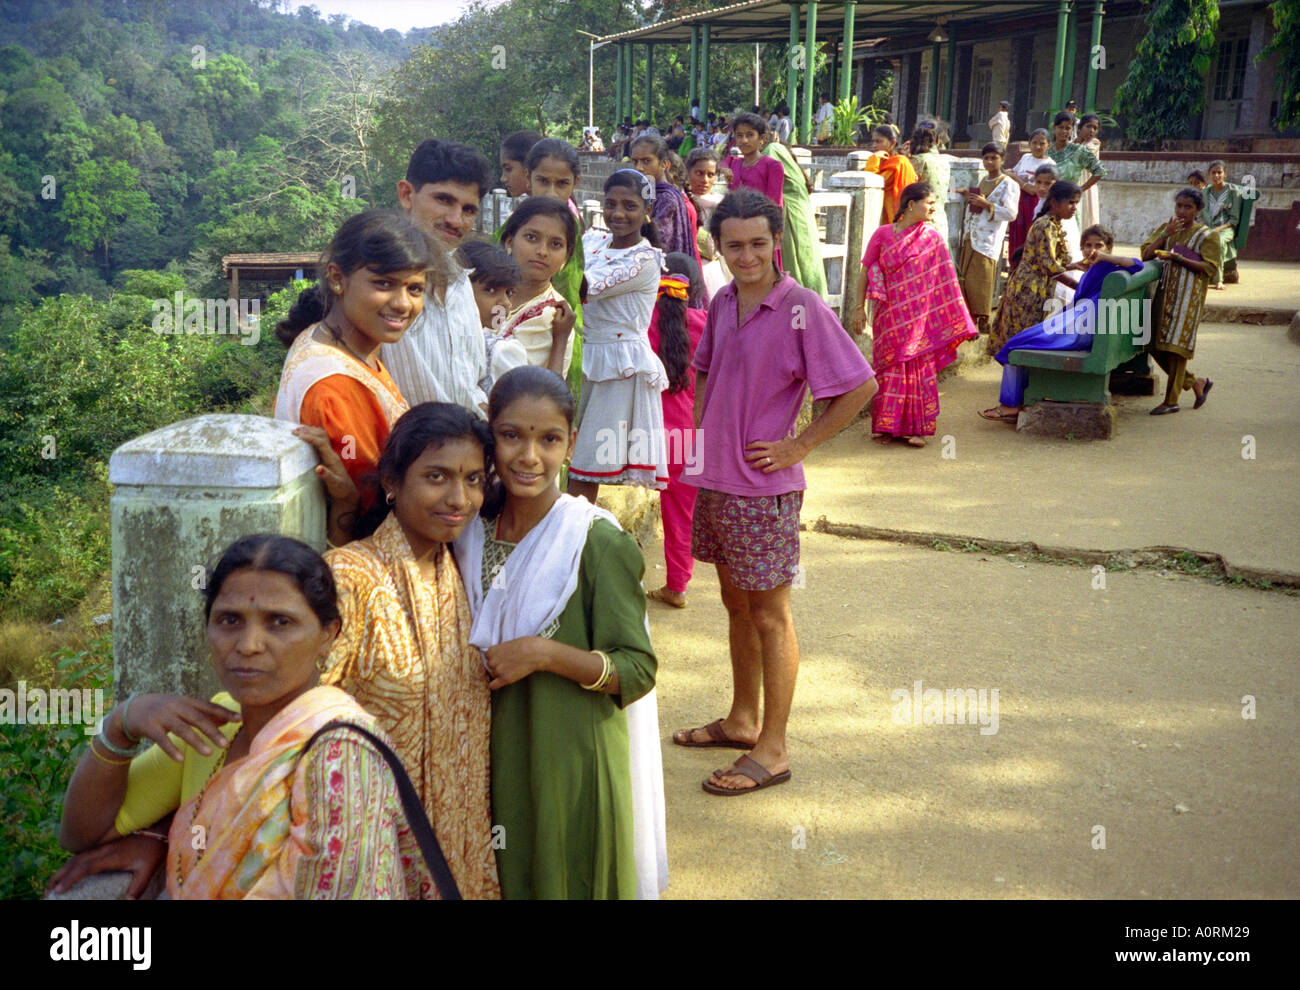 Group of women girls & man in colourful traditional clothing looking interested Jog Falls Karnataka India South Asia Stock Photo